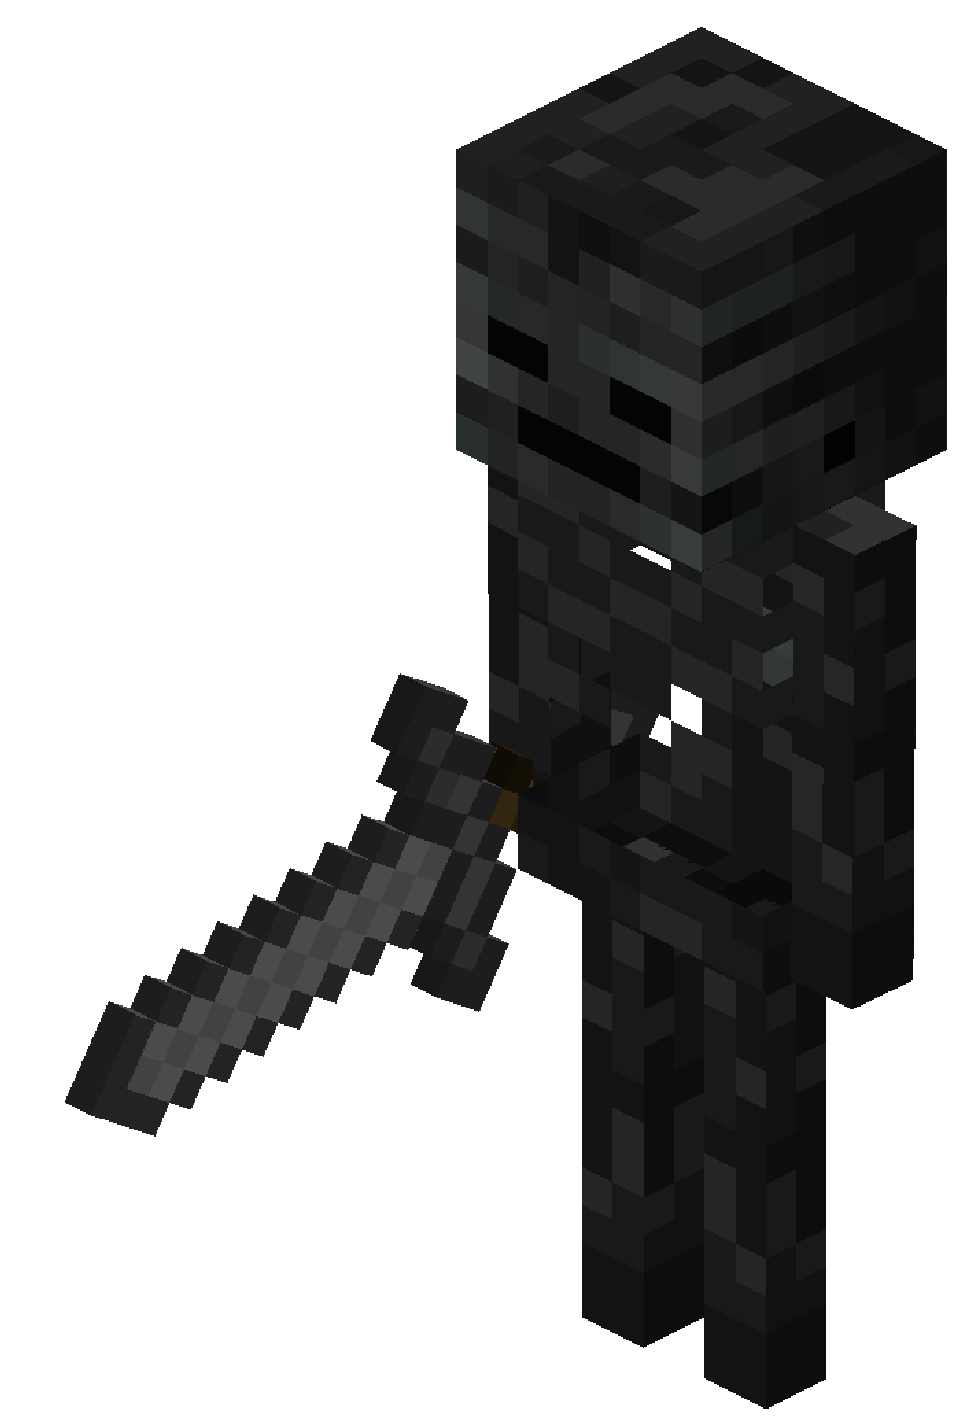 wither skeleton minecraft boss